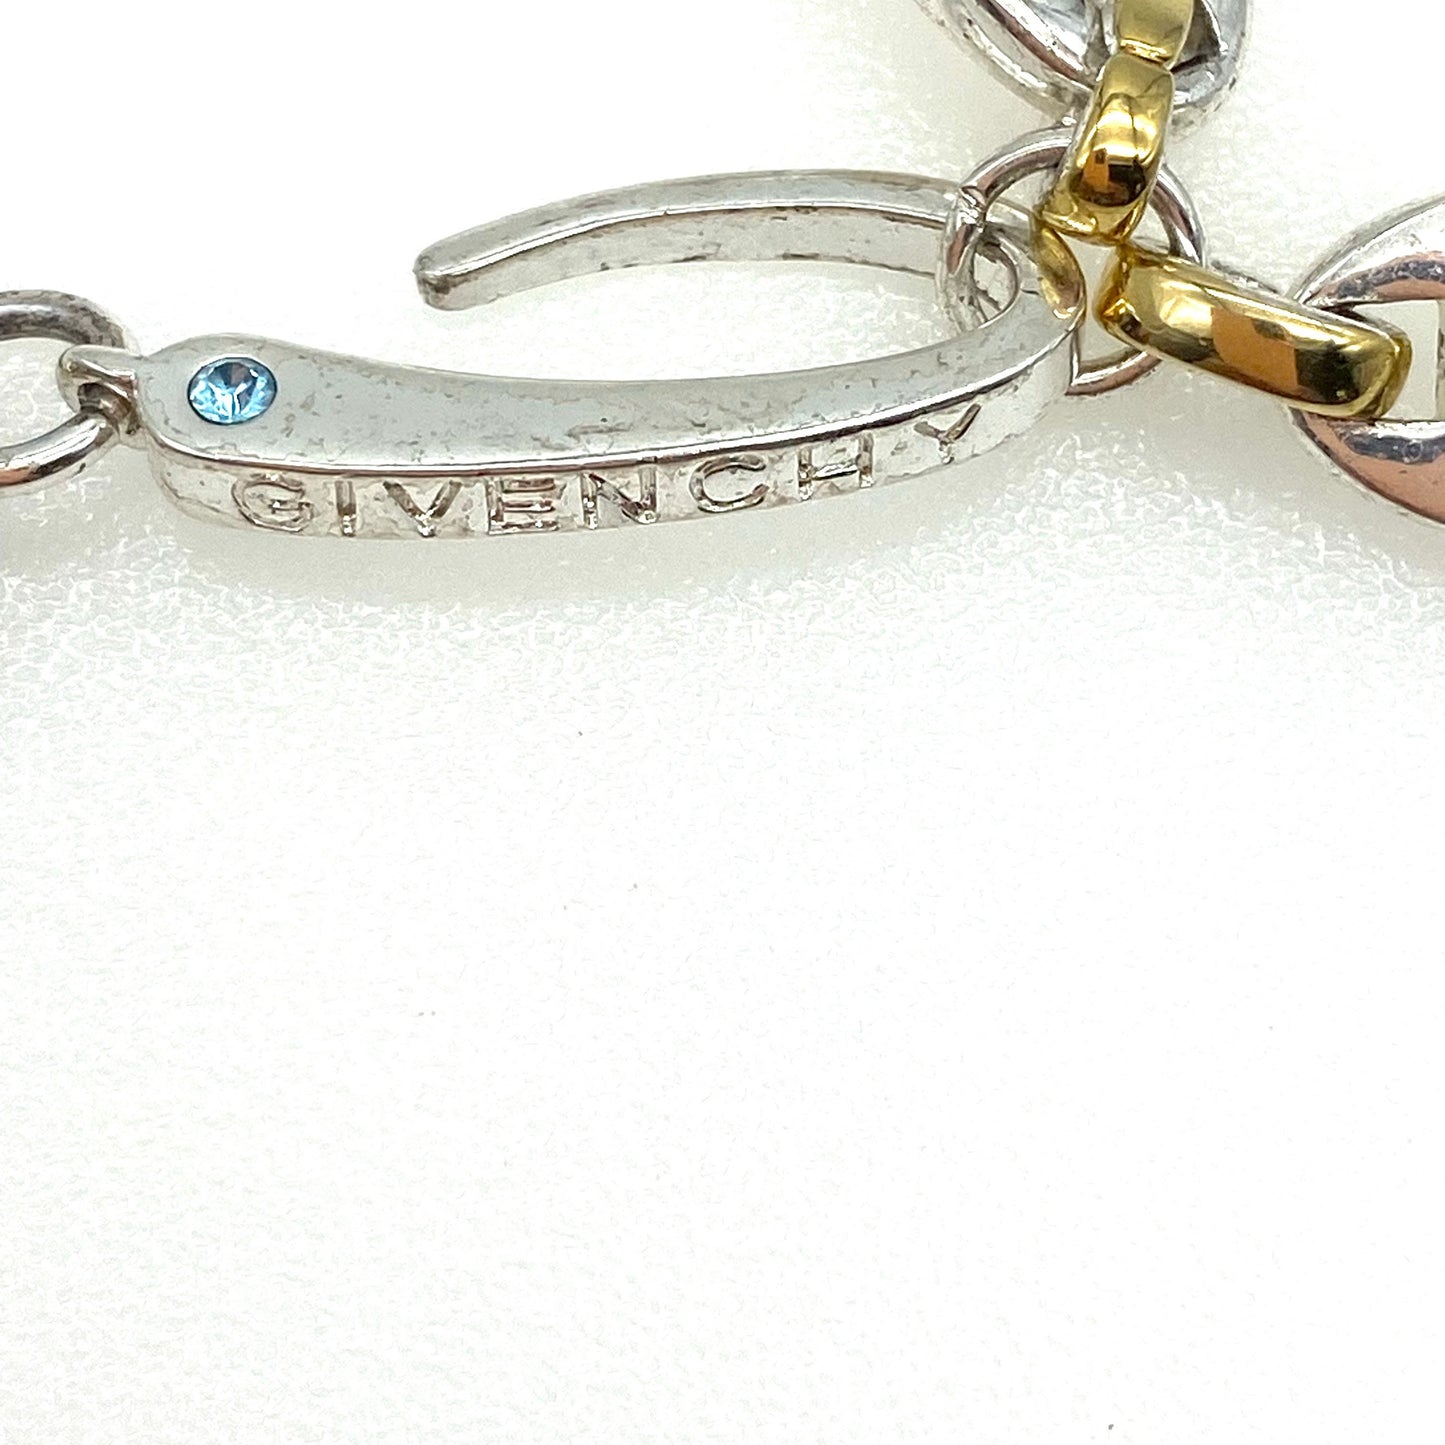 Collier Givenchy